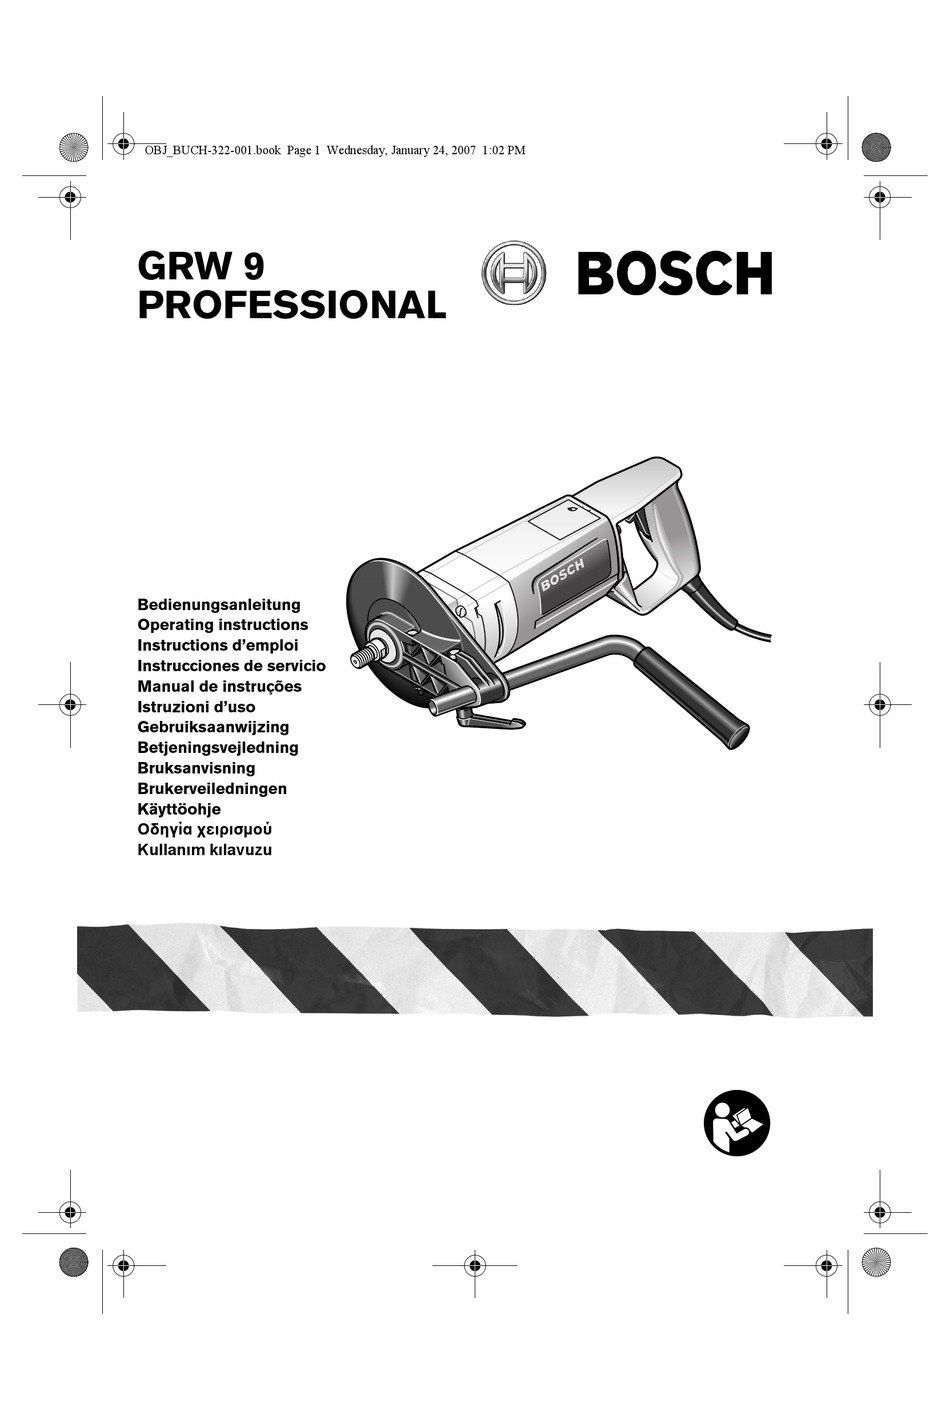 BOSCH PROFESSIONAL GRW 9 OPERATING INSTRUCTIONS MANUAL Pdf Download .